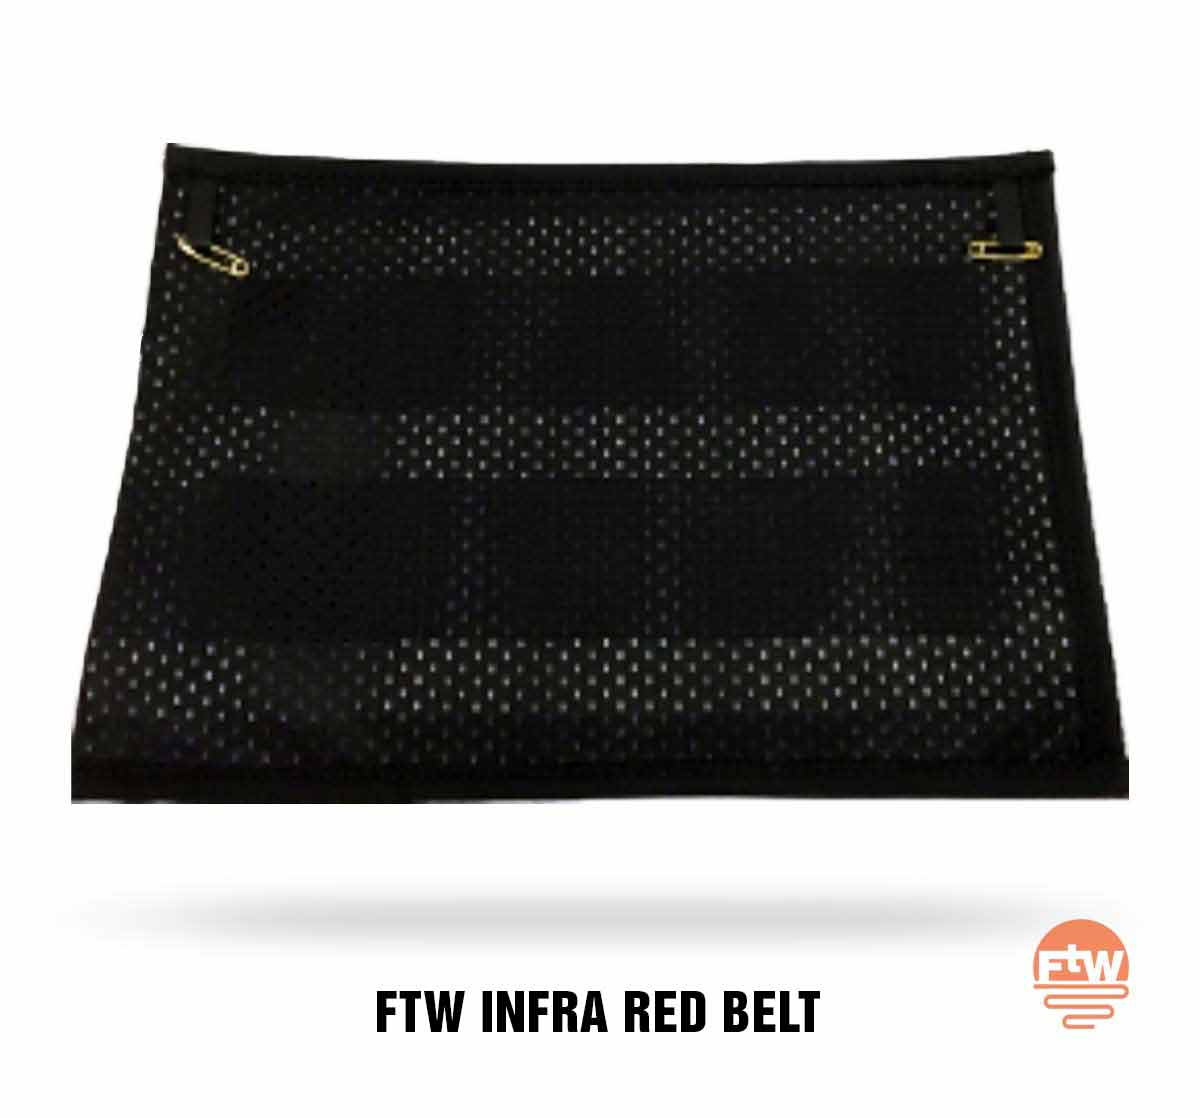 FAR INFRA RED BELT - FEEL THE WARMTH